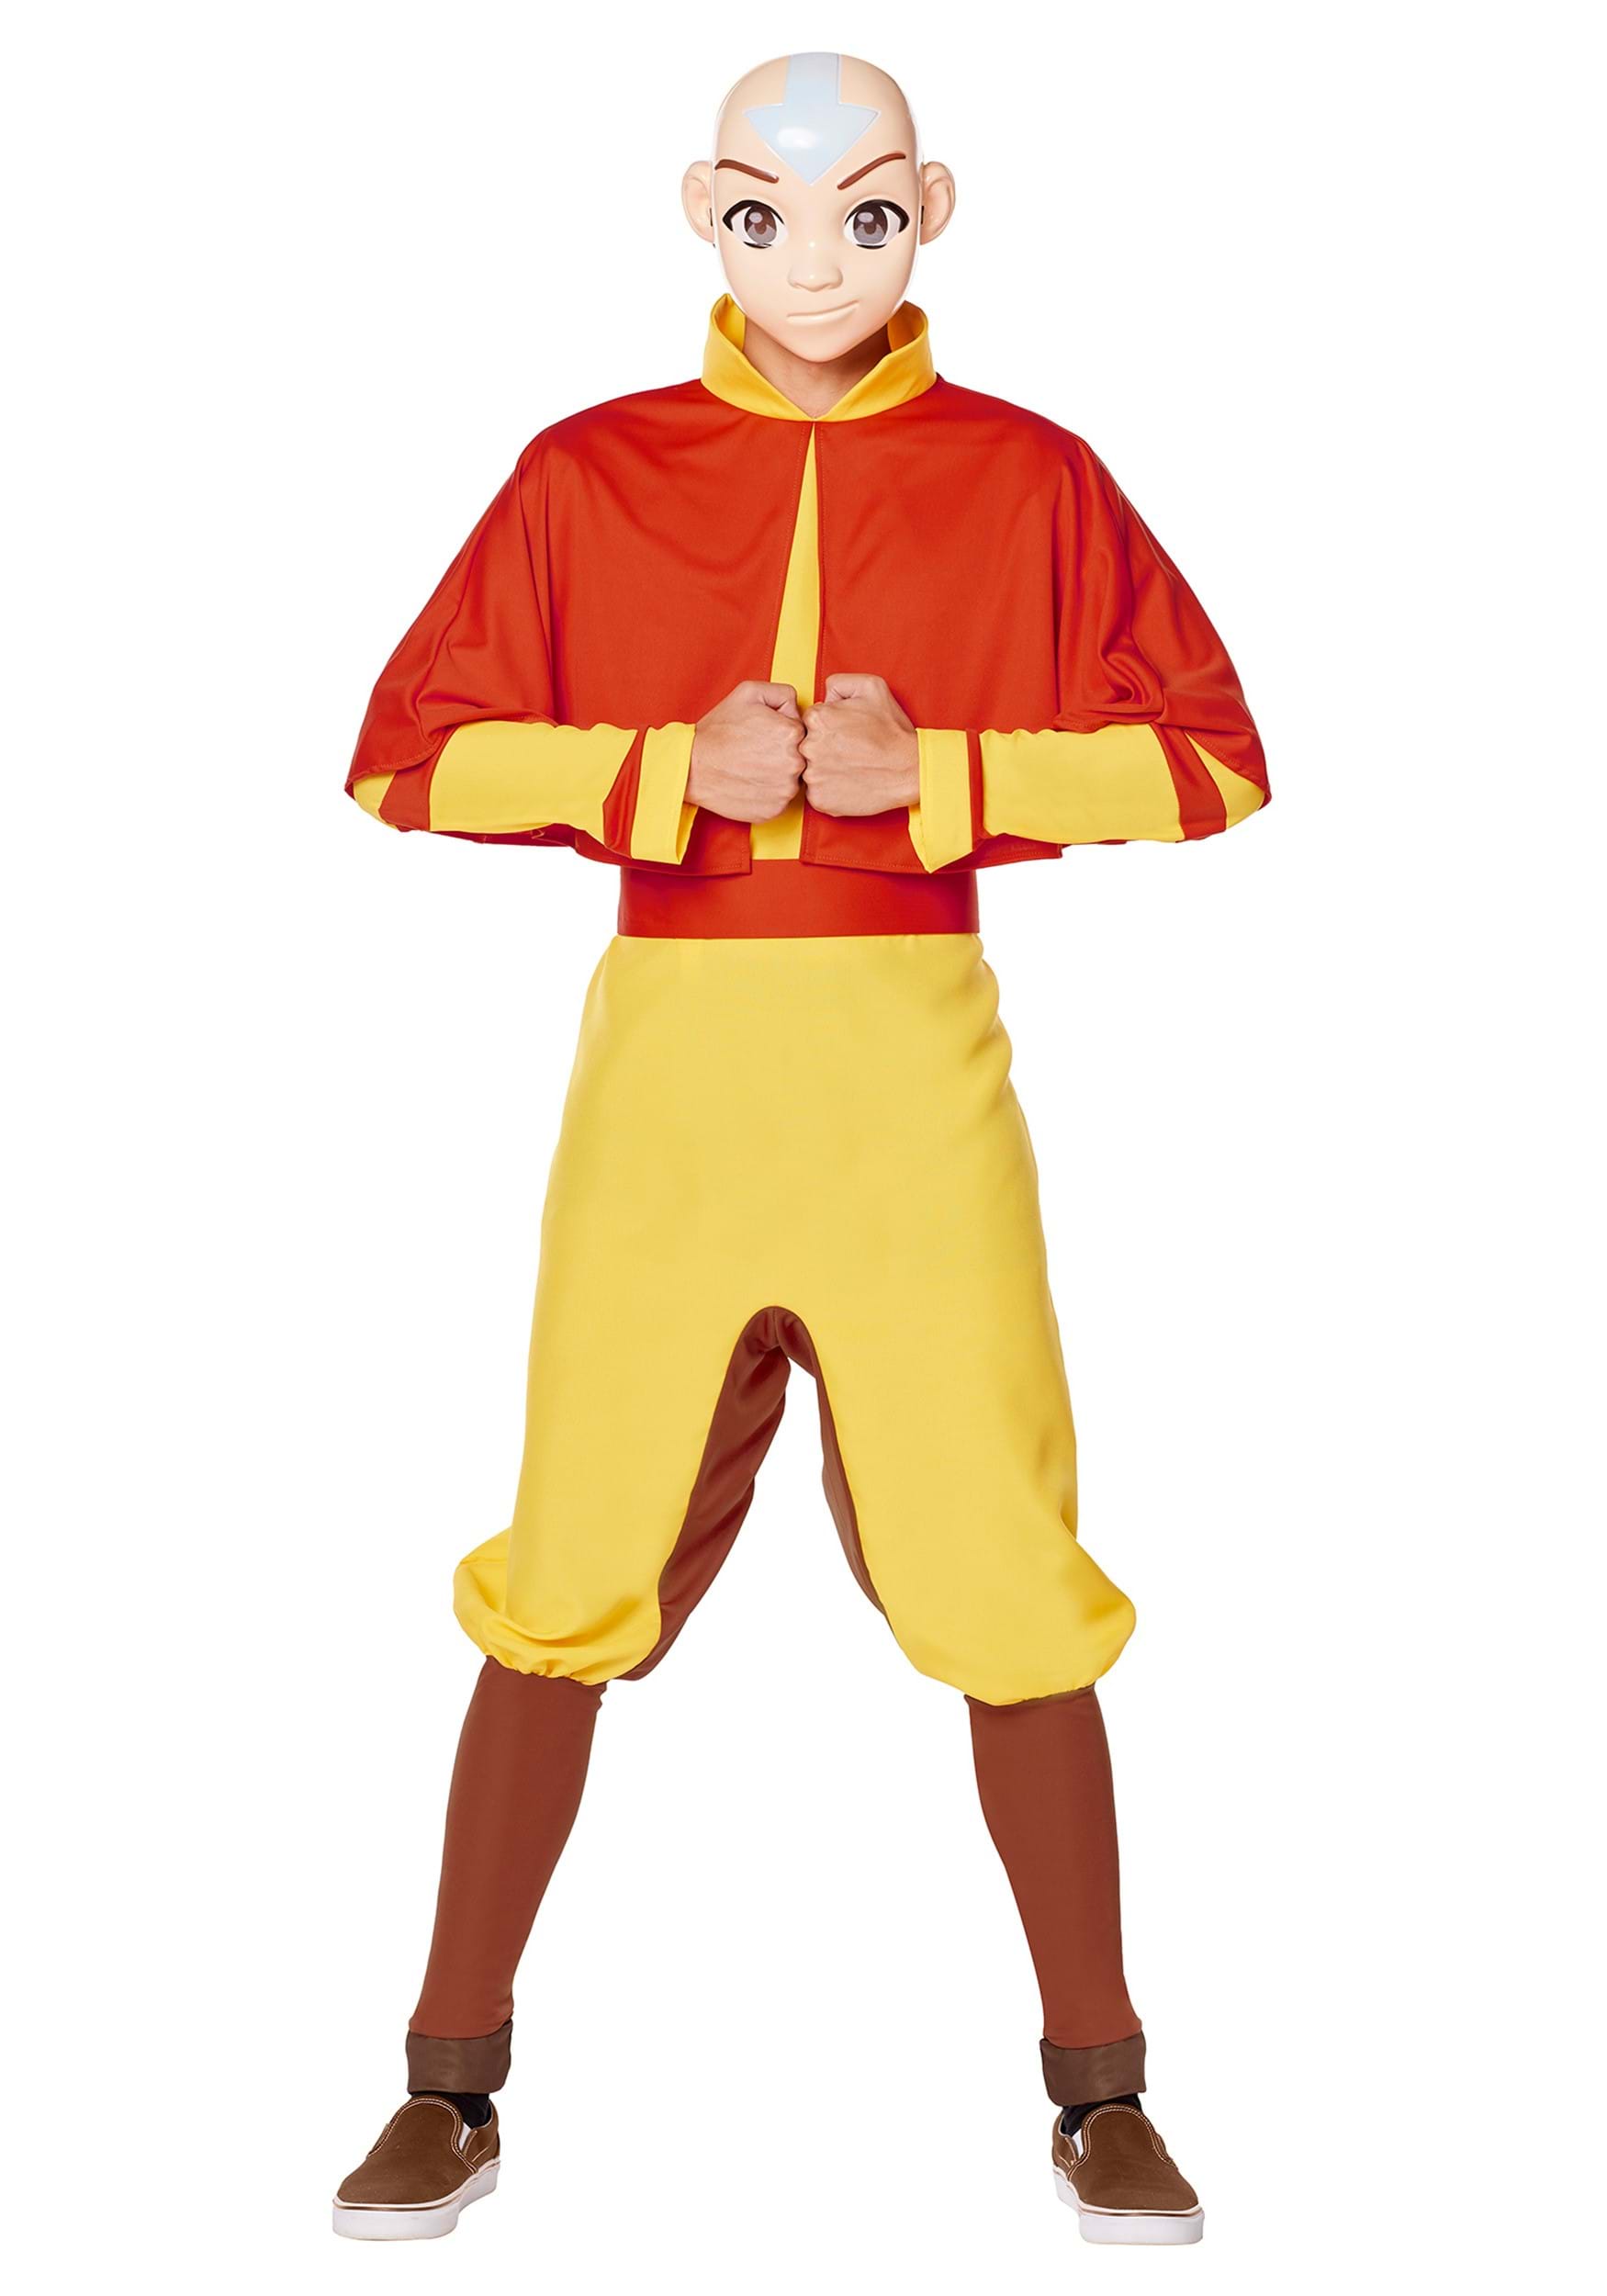 Avatar Aang Costume For Adults , Avatar The Last Airbender Costumes